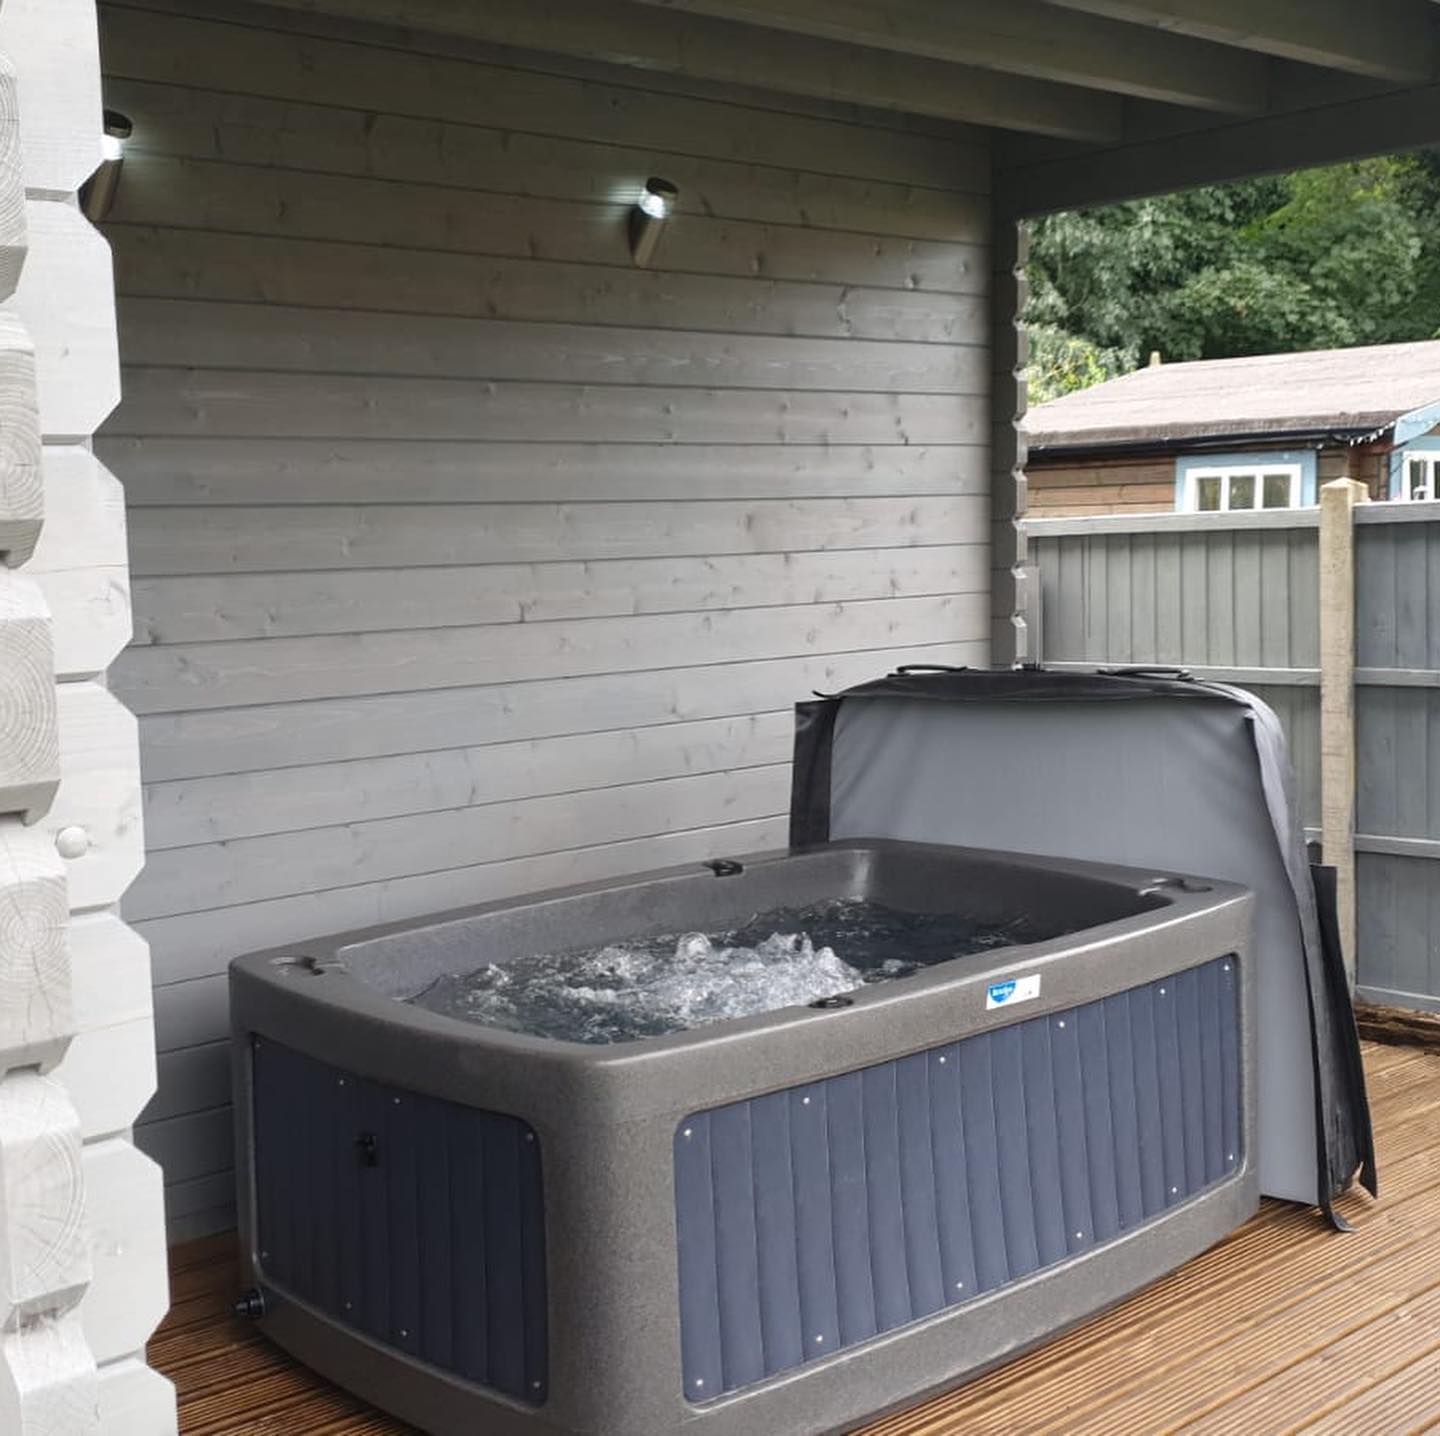 RotoSpa - DuoS240 2- 3 Person Spa - Beyond outdoor living